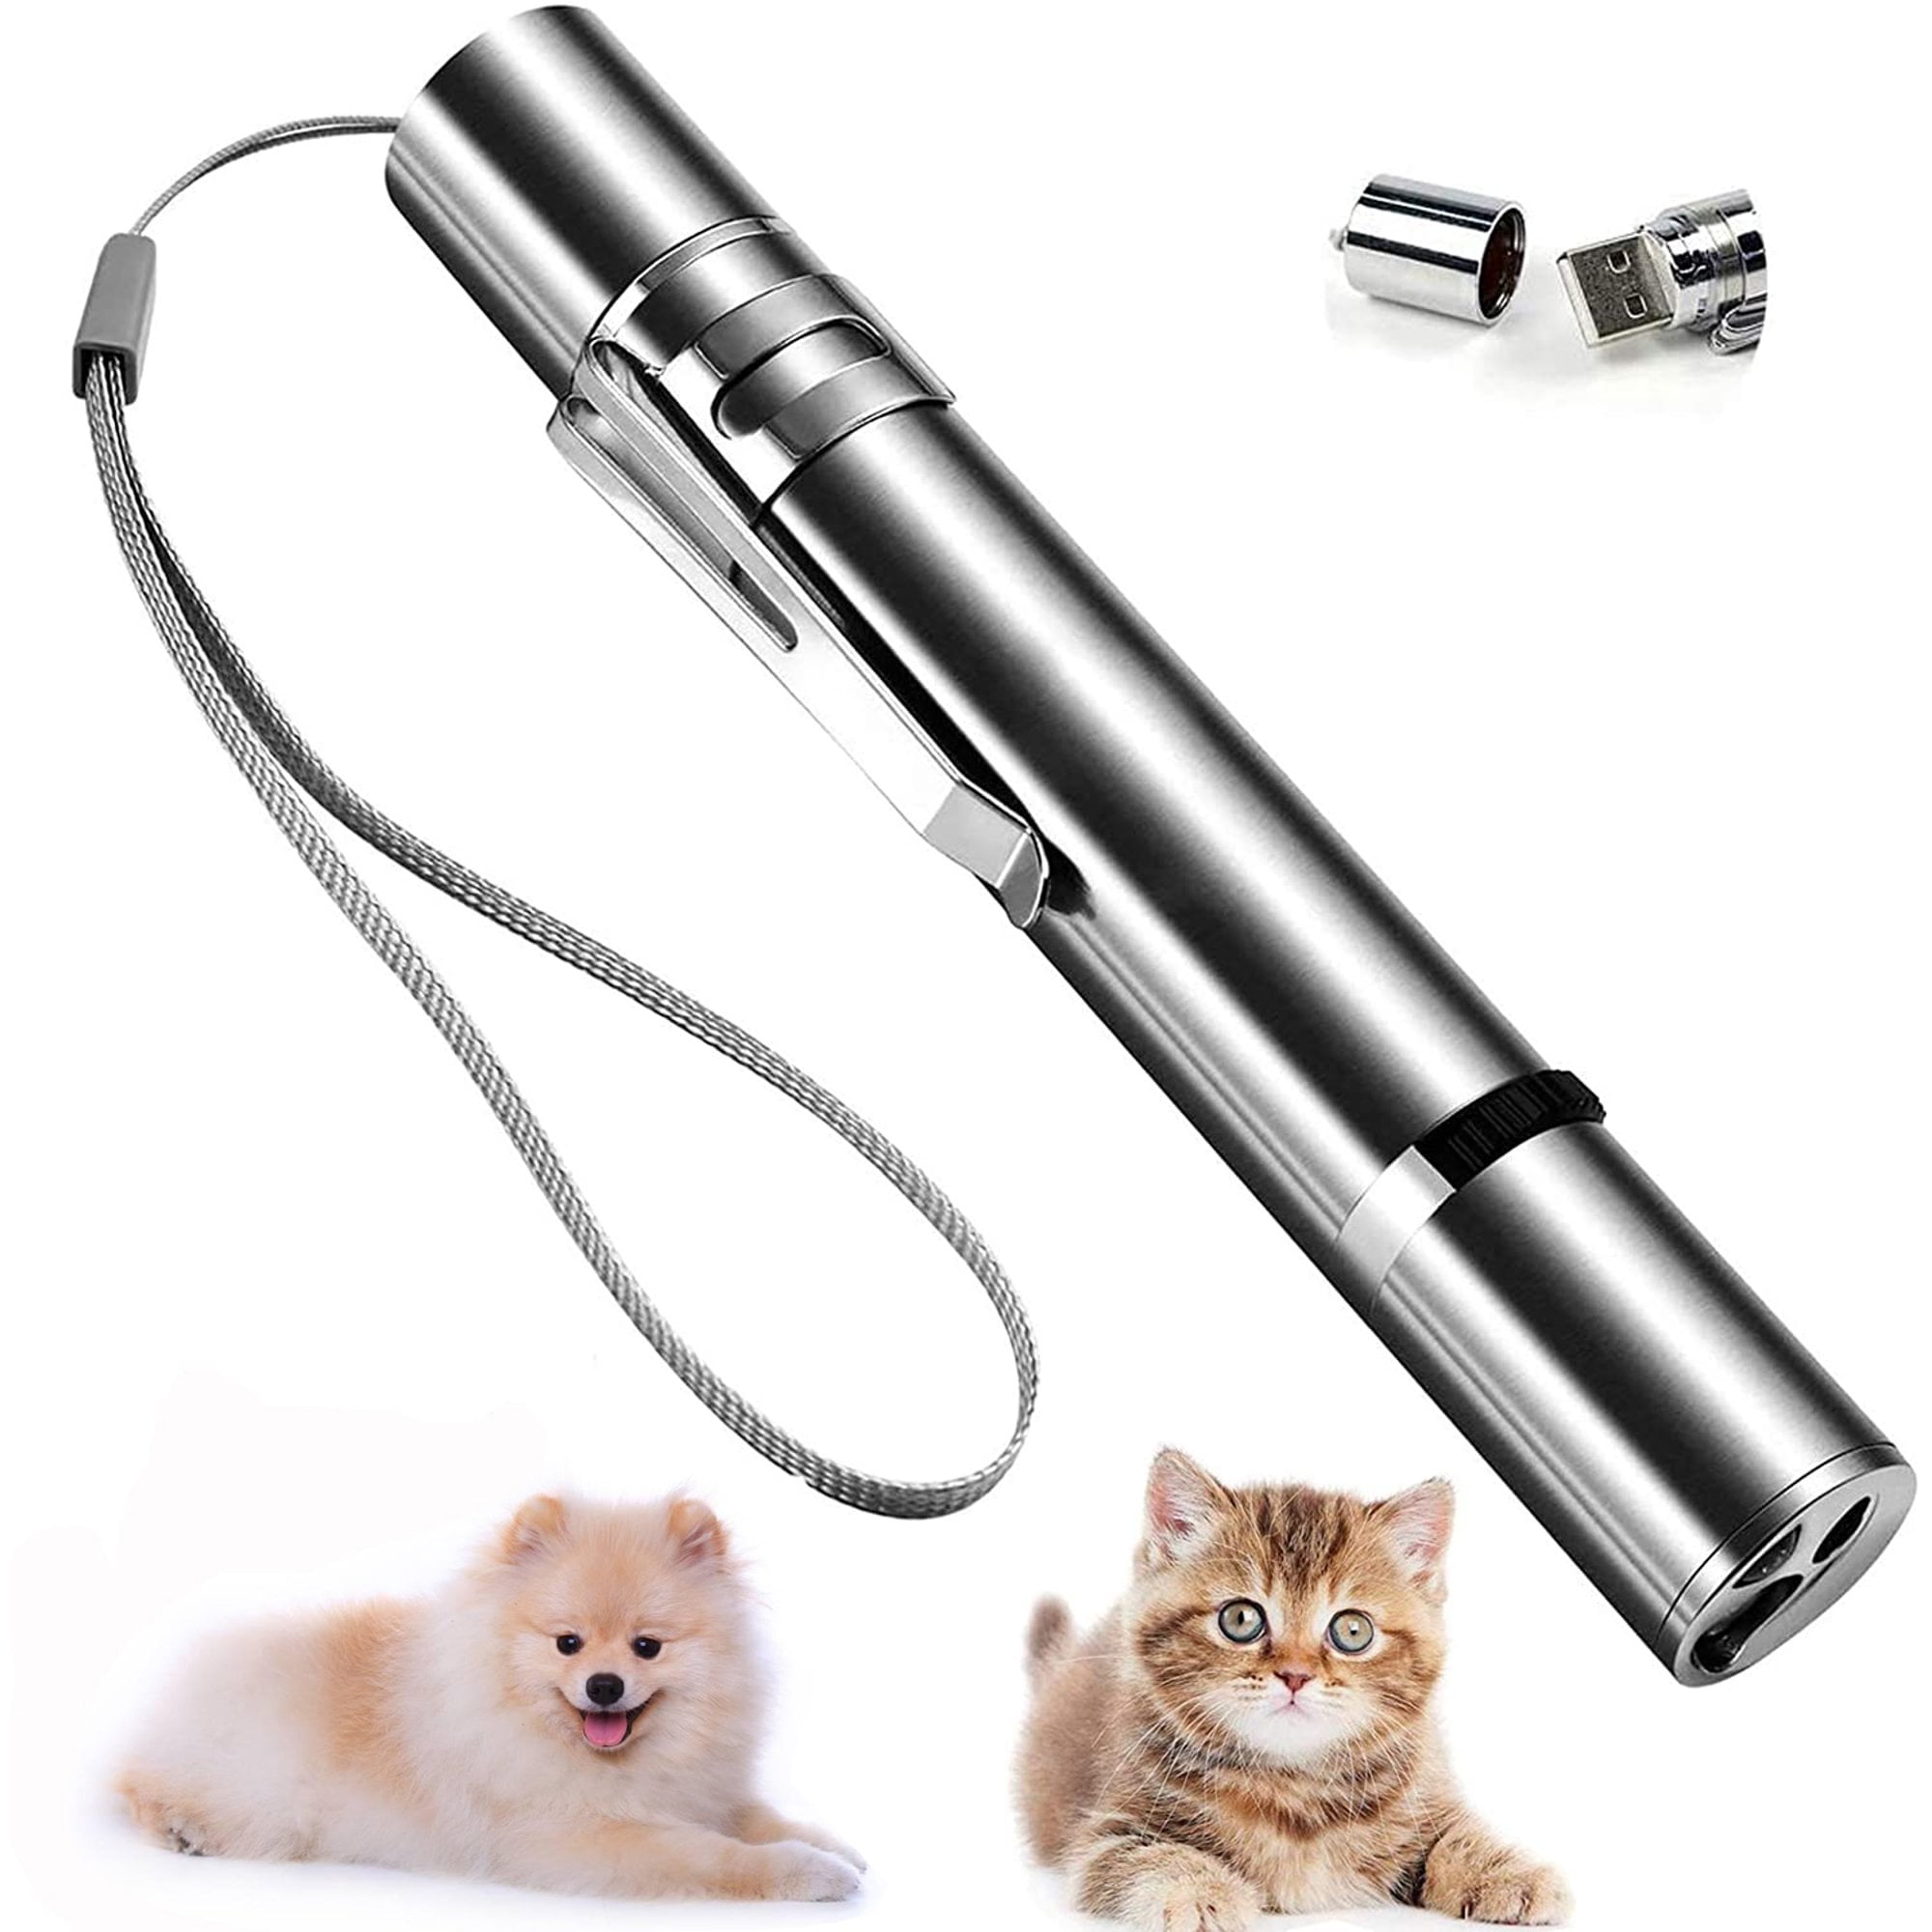 PetLovers Premium Rechargeable Red Laser Pointer & Lazer/Flashlight Cat Toy 